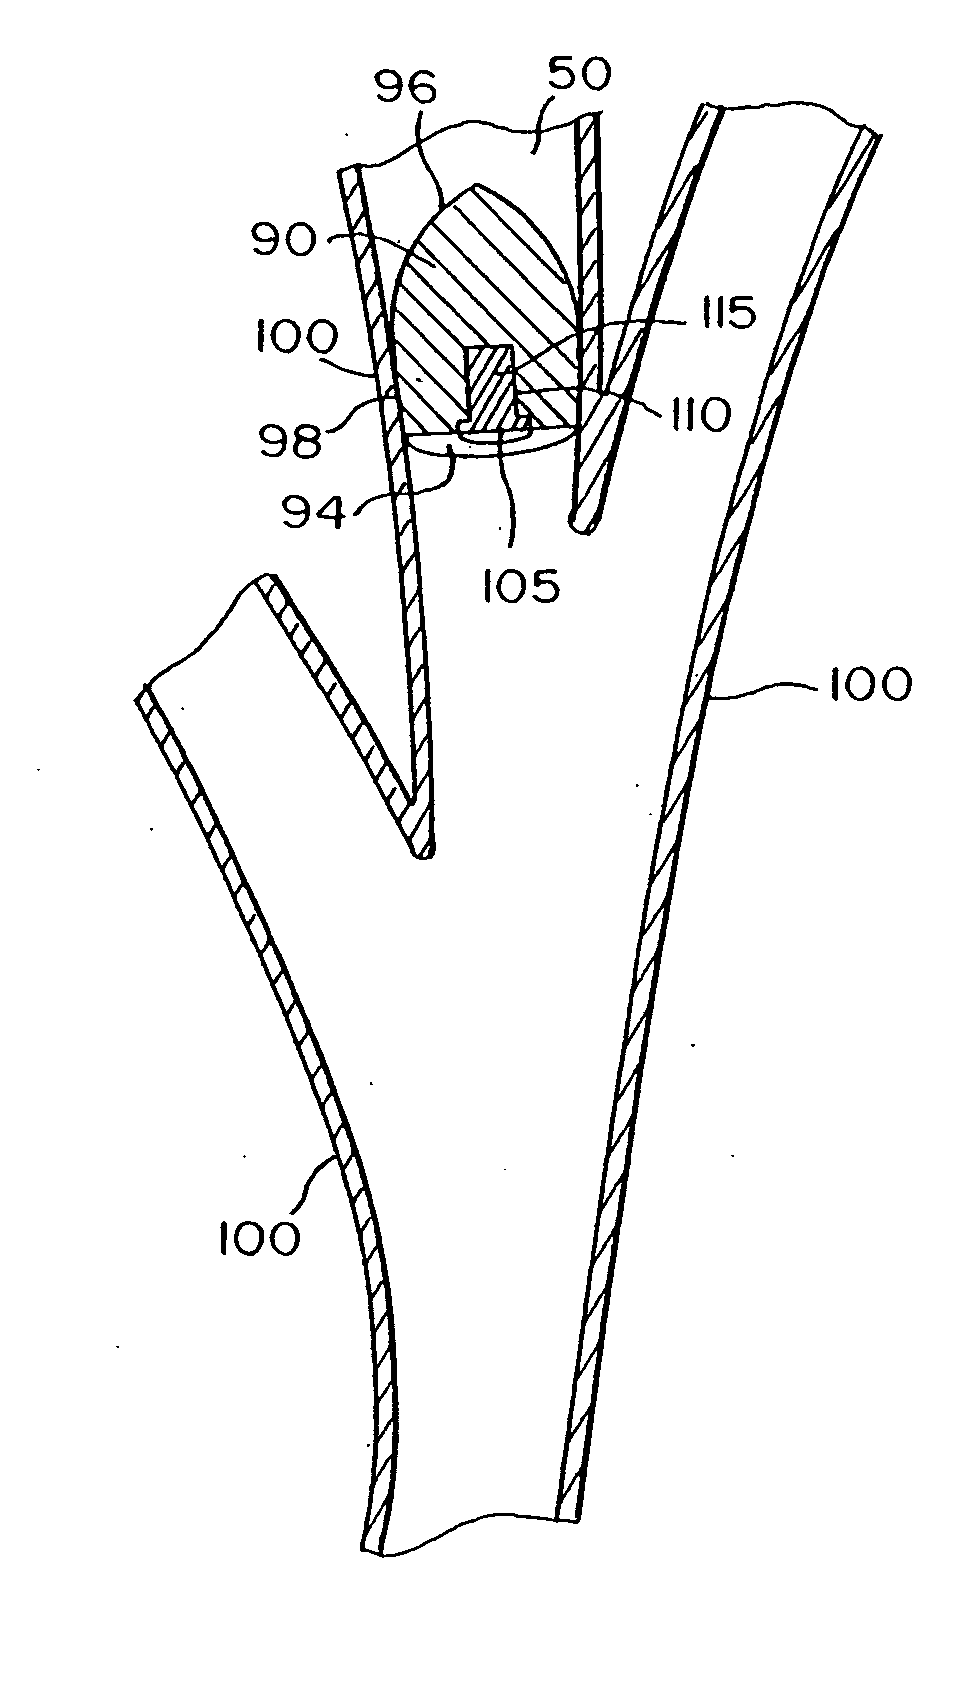 Intra-bronchial obstructing device that controls biological interaction with the patient